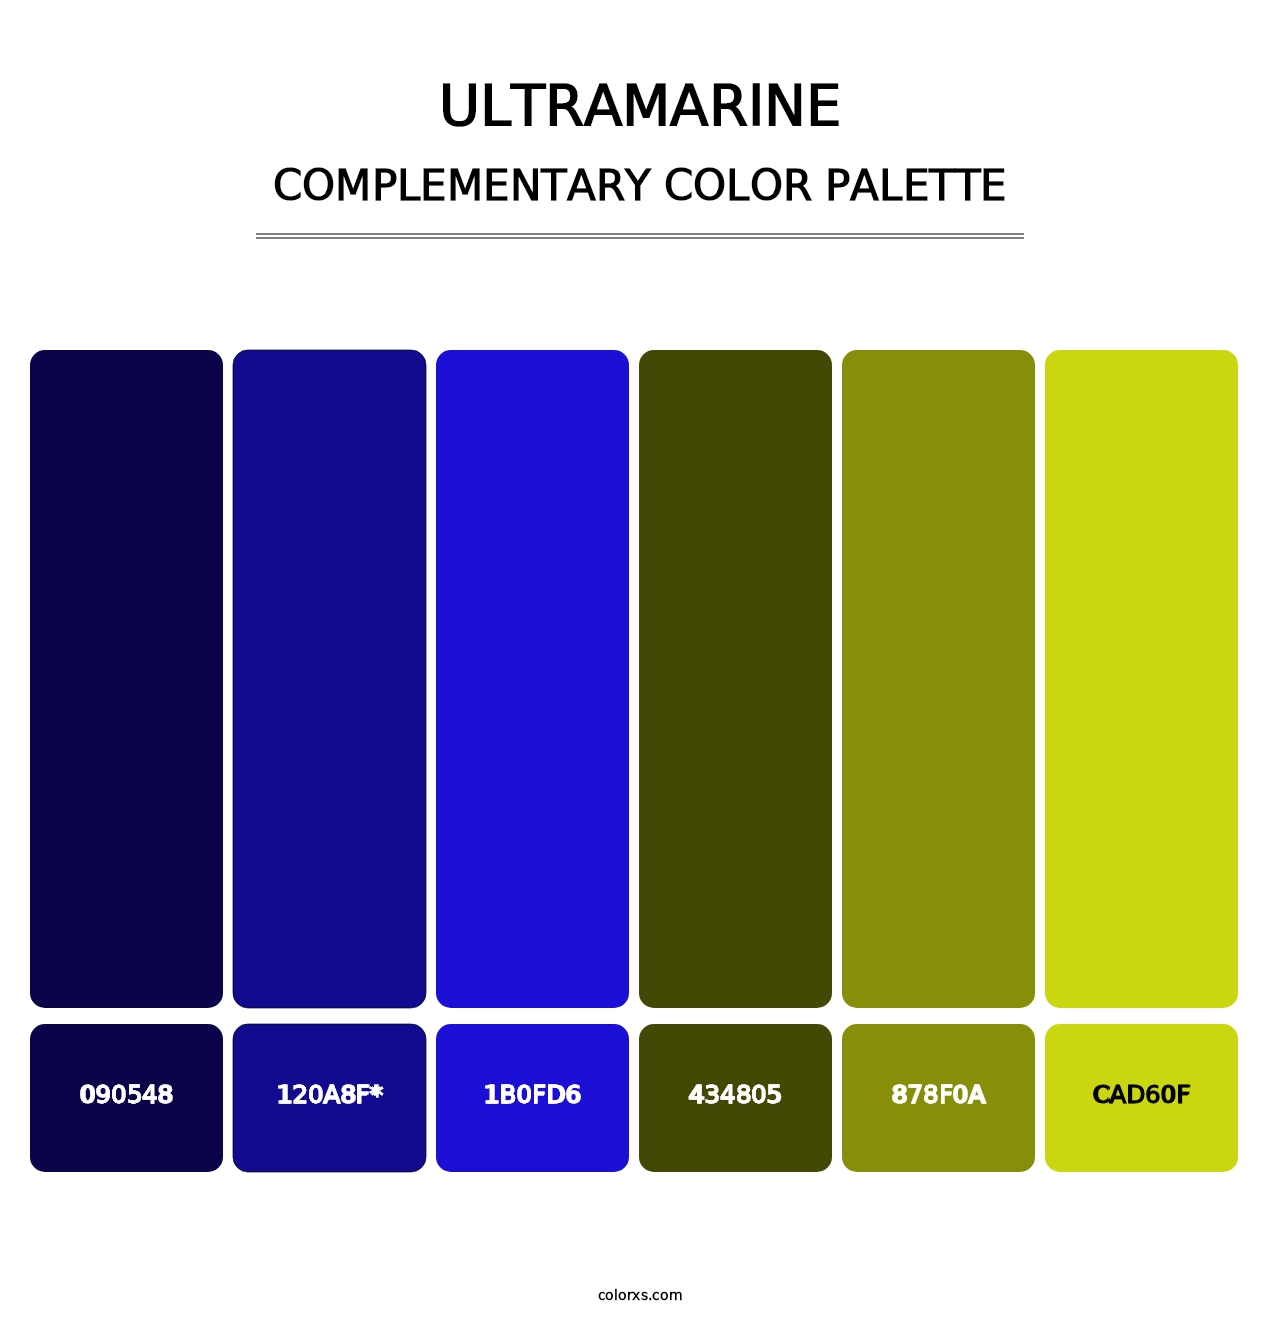 Ultramarine - Complementary Color Palette